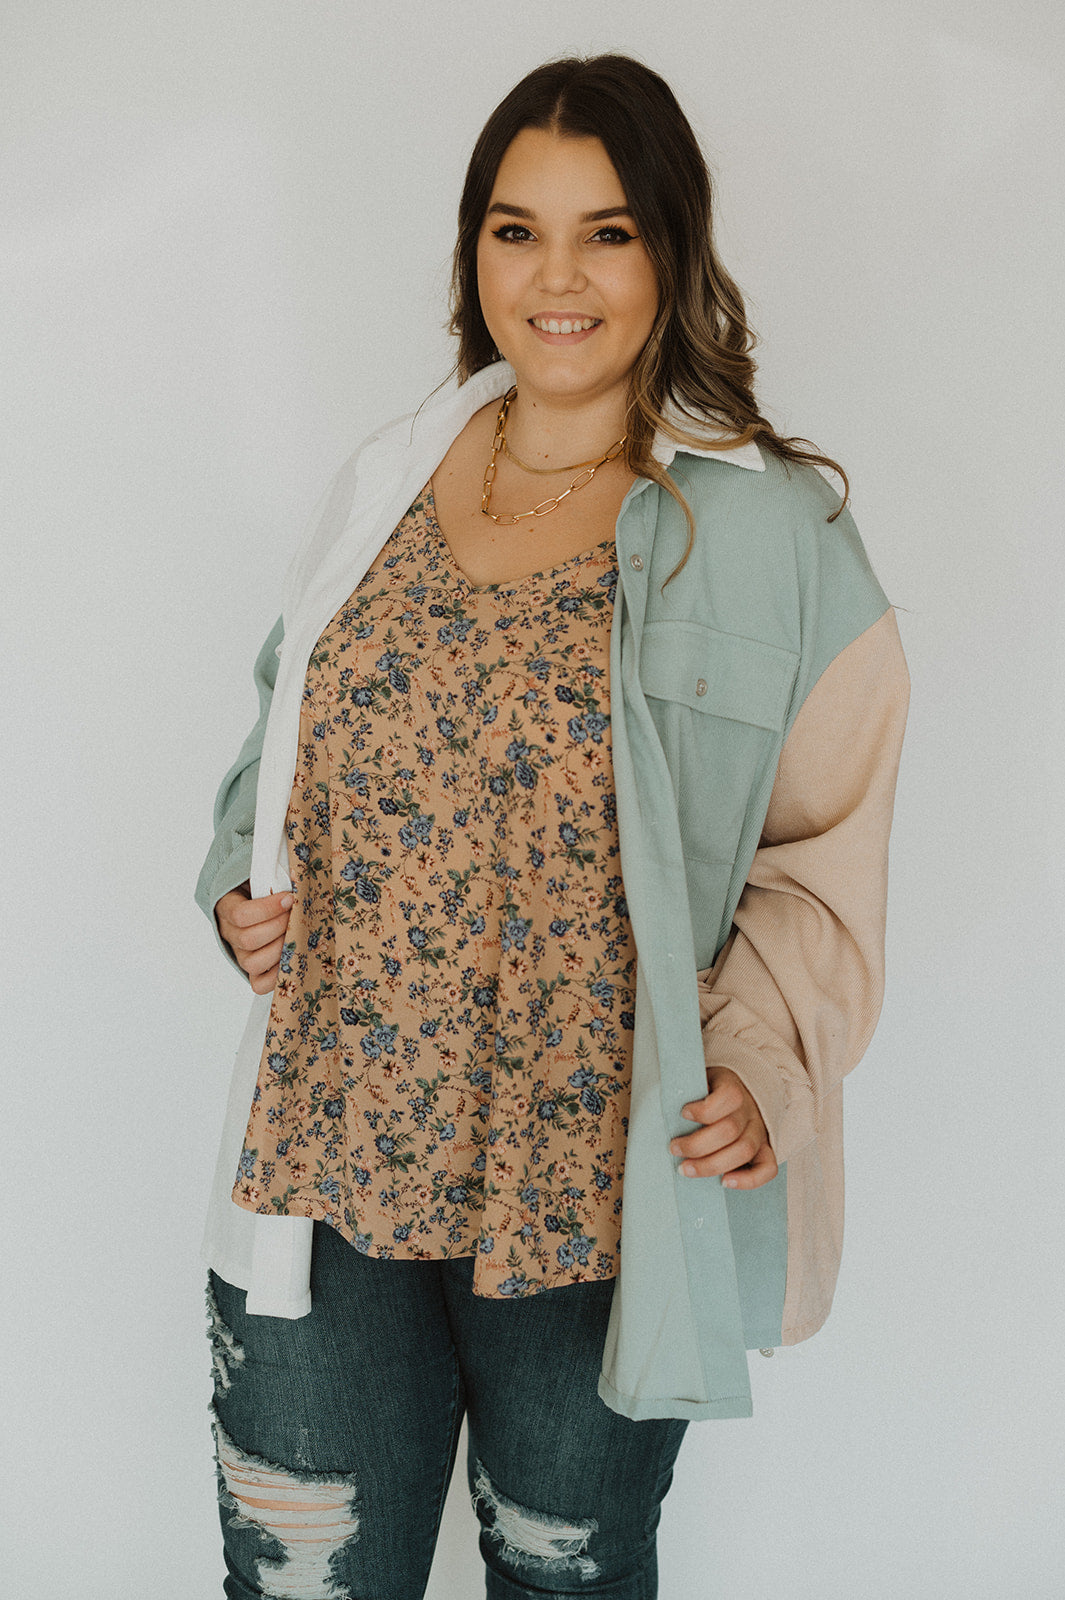 Plus Size Styles for Women | Peachy Keen Boutique